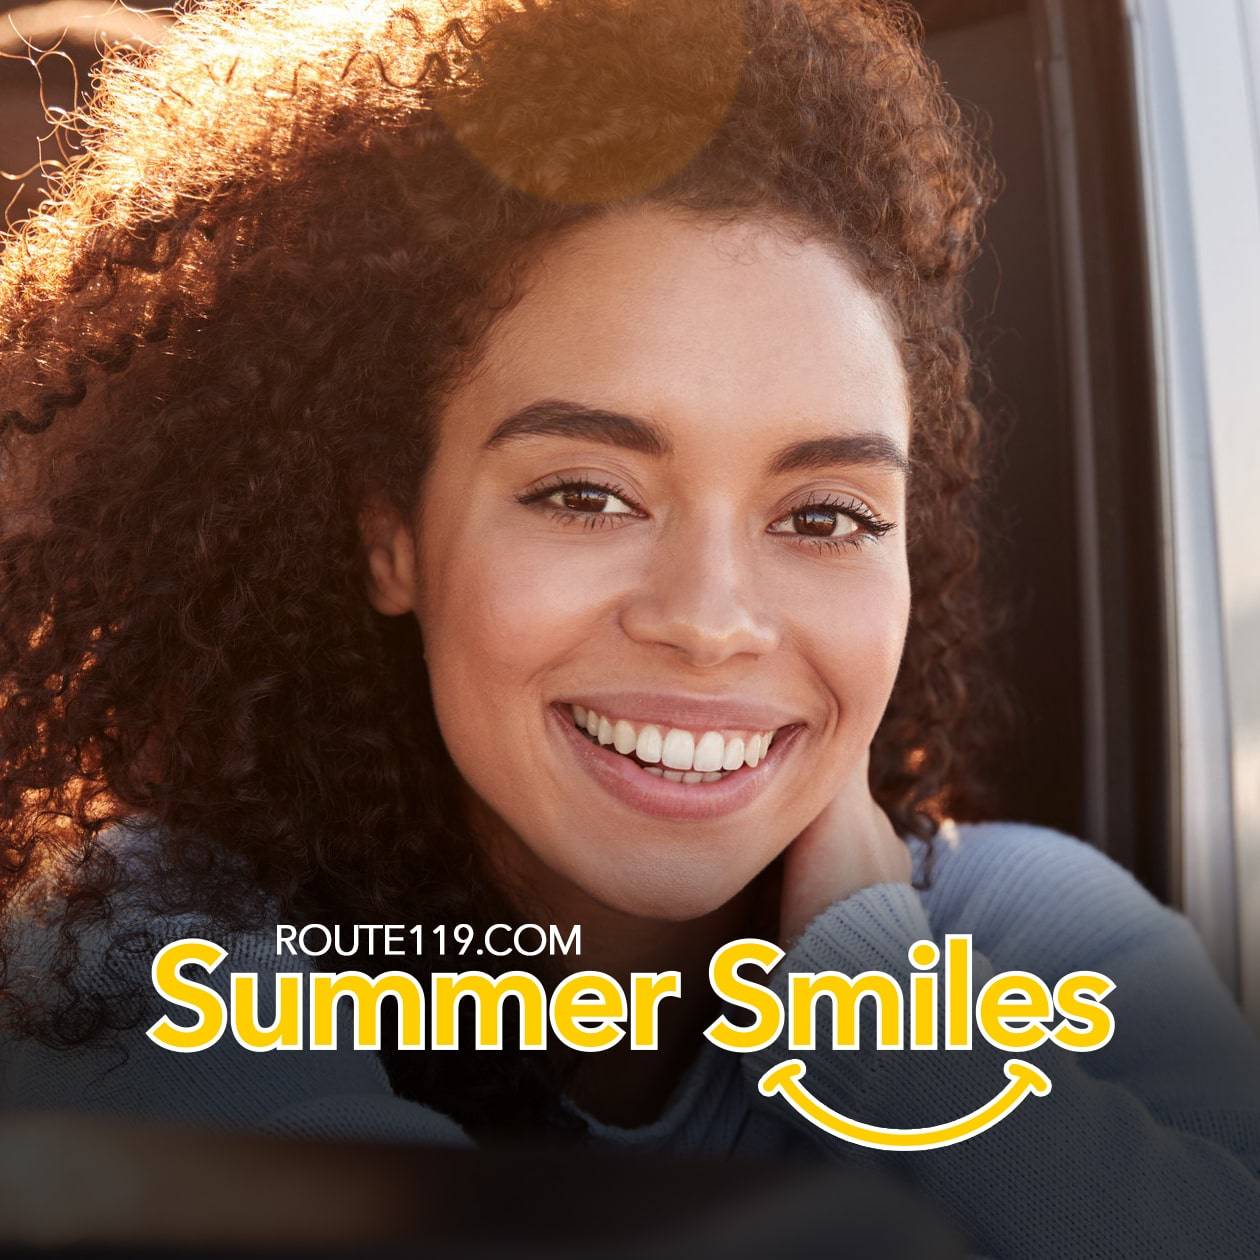 People in car smiling. Route 119 Summer Smiles.